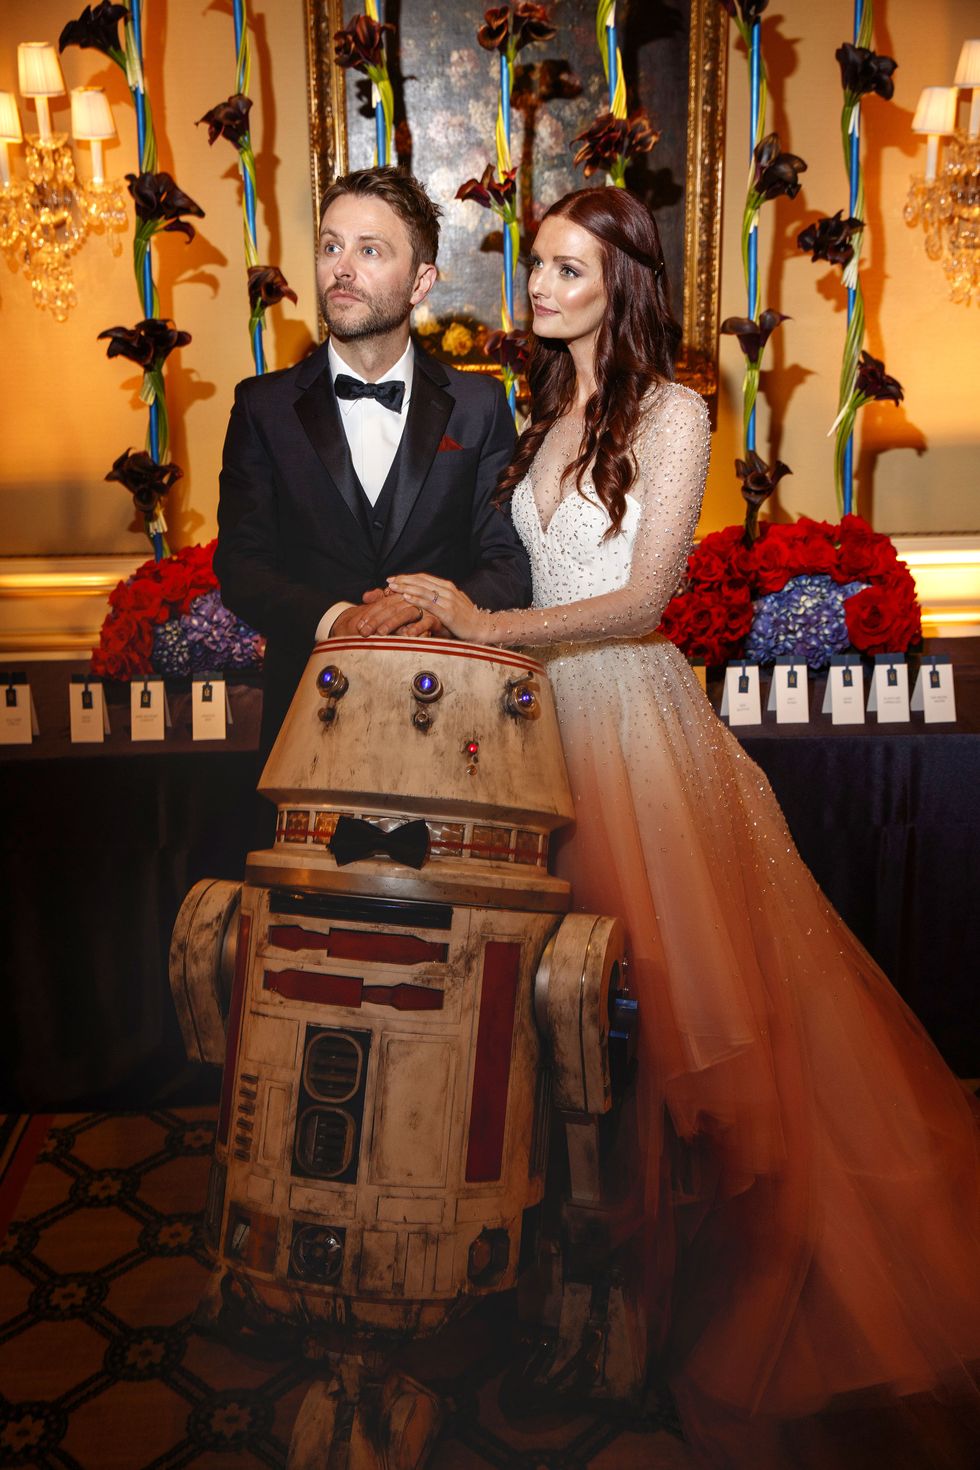 <p>Lydia and Chris' nuptials were a true combination of everything they love: from <em data-redactor-tag="em" data-verified="redactor">Dr. Who</em> to <em data-redactor-tag="em" data-verified="redactor">Star Wars</em>, Western duds and <a href="http://www.bluestardonuts.com/" target="_blank">Blue Star Donuts</a> all set in a lavish ballroom with hundreds of red roses.&nbsp;After their undeniably personal&nbsp;nuptials, Lydia penned a love note to Chris on her Instagram which read:&nbsp;"I love you, and I will love you until I die, and if there's a life after that, I'll love you then too."&nbsp;</p>